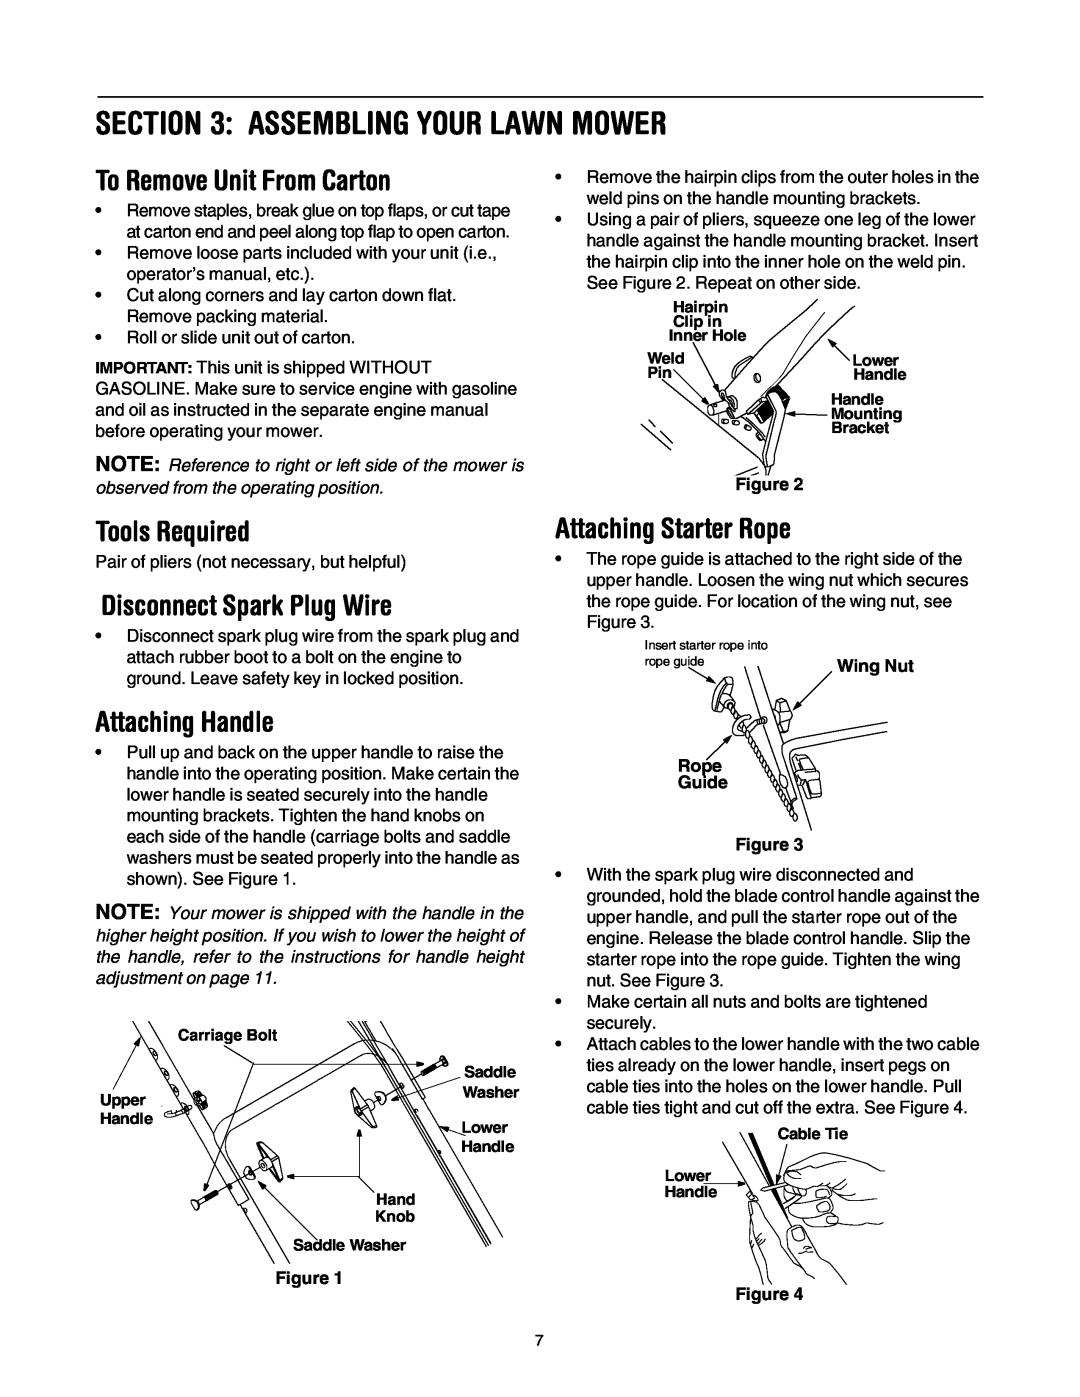 Yard-Man 106D Assembling Your Lawn Mower, To Remove Unit From Carton, Tools Required, Disconnect Spark Plug Wire, Wing Nut 